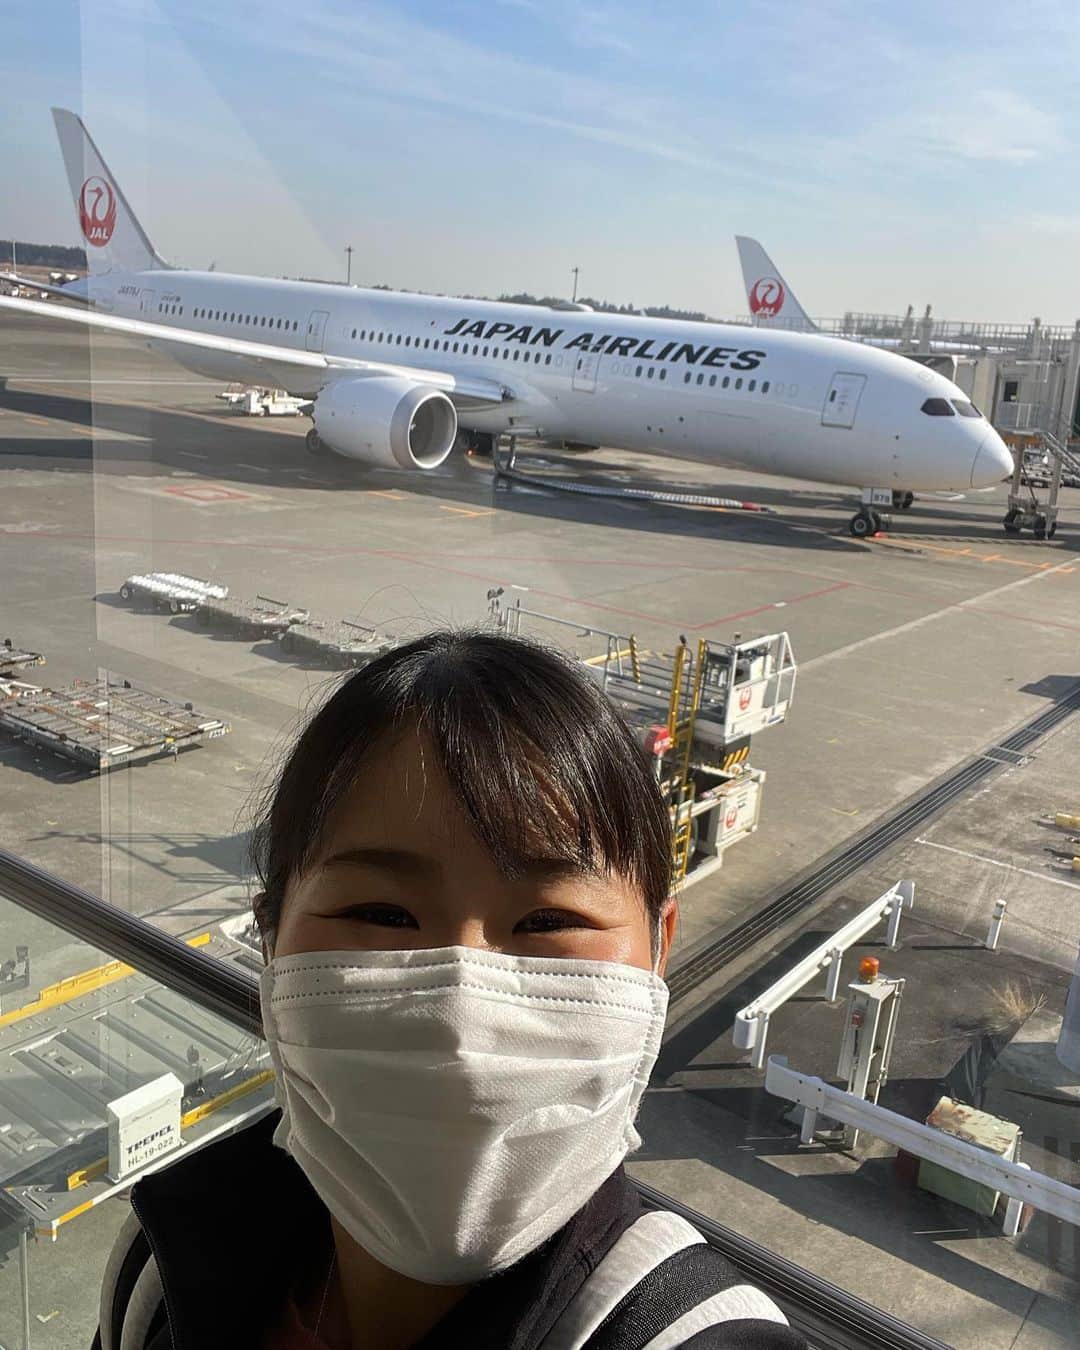 畑岡奈紗のインスタグラム：「I turned 24! Thank you all for your kind messages😊 I will continue to do my best!   Also my first flight of 2023 was birthday flight to the US✈️✨ @japanairlines_jal celebrated me during this flight and I got an amazing strawberries from a farm operated near the airport🍓 It smelled so sweet even when it was in the box. I was really happy to receive my favorite fruit as a gift♪   When I turned 20, four years ago, I went to the United States on my birthday, and the coming-of-age ceremony was on the same day, so I remember going out in a hurry lol😂   So this was my 2nd birthday flight ✈️ This time, I was able to travel to the United States with peace and comfort with the flight with @japanairlines_jal, who has been supporting me since I turned professional, and it became a wonderful memory. Thanks JAL for such an amazing support 😌   I'll do my best in the season opening match!  24歳になりました！ お祝いメッセージありがとうございます😊 これからも感謝の気持ちを持って頑張って参ります！  そして、今年初の渡米でバースデーフライトでした✈️✨ @japanairlines_jal 様にお祝いして頂きました！ 空港の近くで運営されている農園で採れたイチゴを頂きました🍓 箱に入ったままでも香る甘〜い匂いに実際頂いてもとっても甘く美味しかったです😋 大好きなイチゴのプレゼント嬉しかったです♪  実は4年前の20歳の時も誕生日に渡米して、成人式も同日だったのでバタバタと出かけたのを覚えています笑😂  2回目のバースデーフライト✈️ 今回もプロ転向当初からサポートして頂いている @japanairlines_jal 様のフライトで安心して渡米出来たこととても良い思い出になりました。 未だコロナの影響で大変な中サポートして頂ける事感謝申し上げます。 いつも本当にありがとうございます😌  開幕戦頑張ります！  #2023初フライト #バースデーフライト  #24」